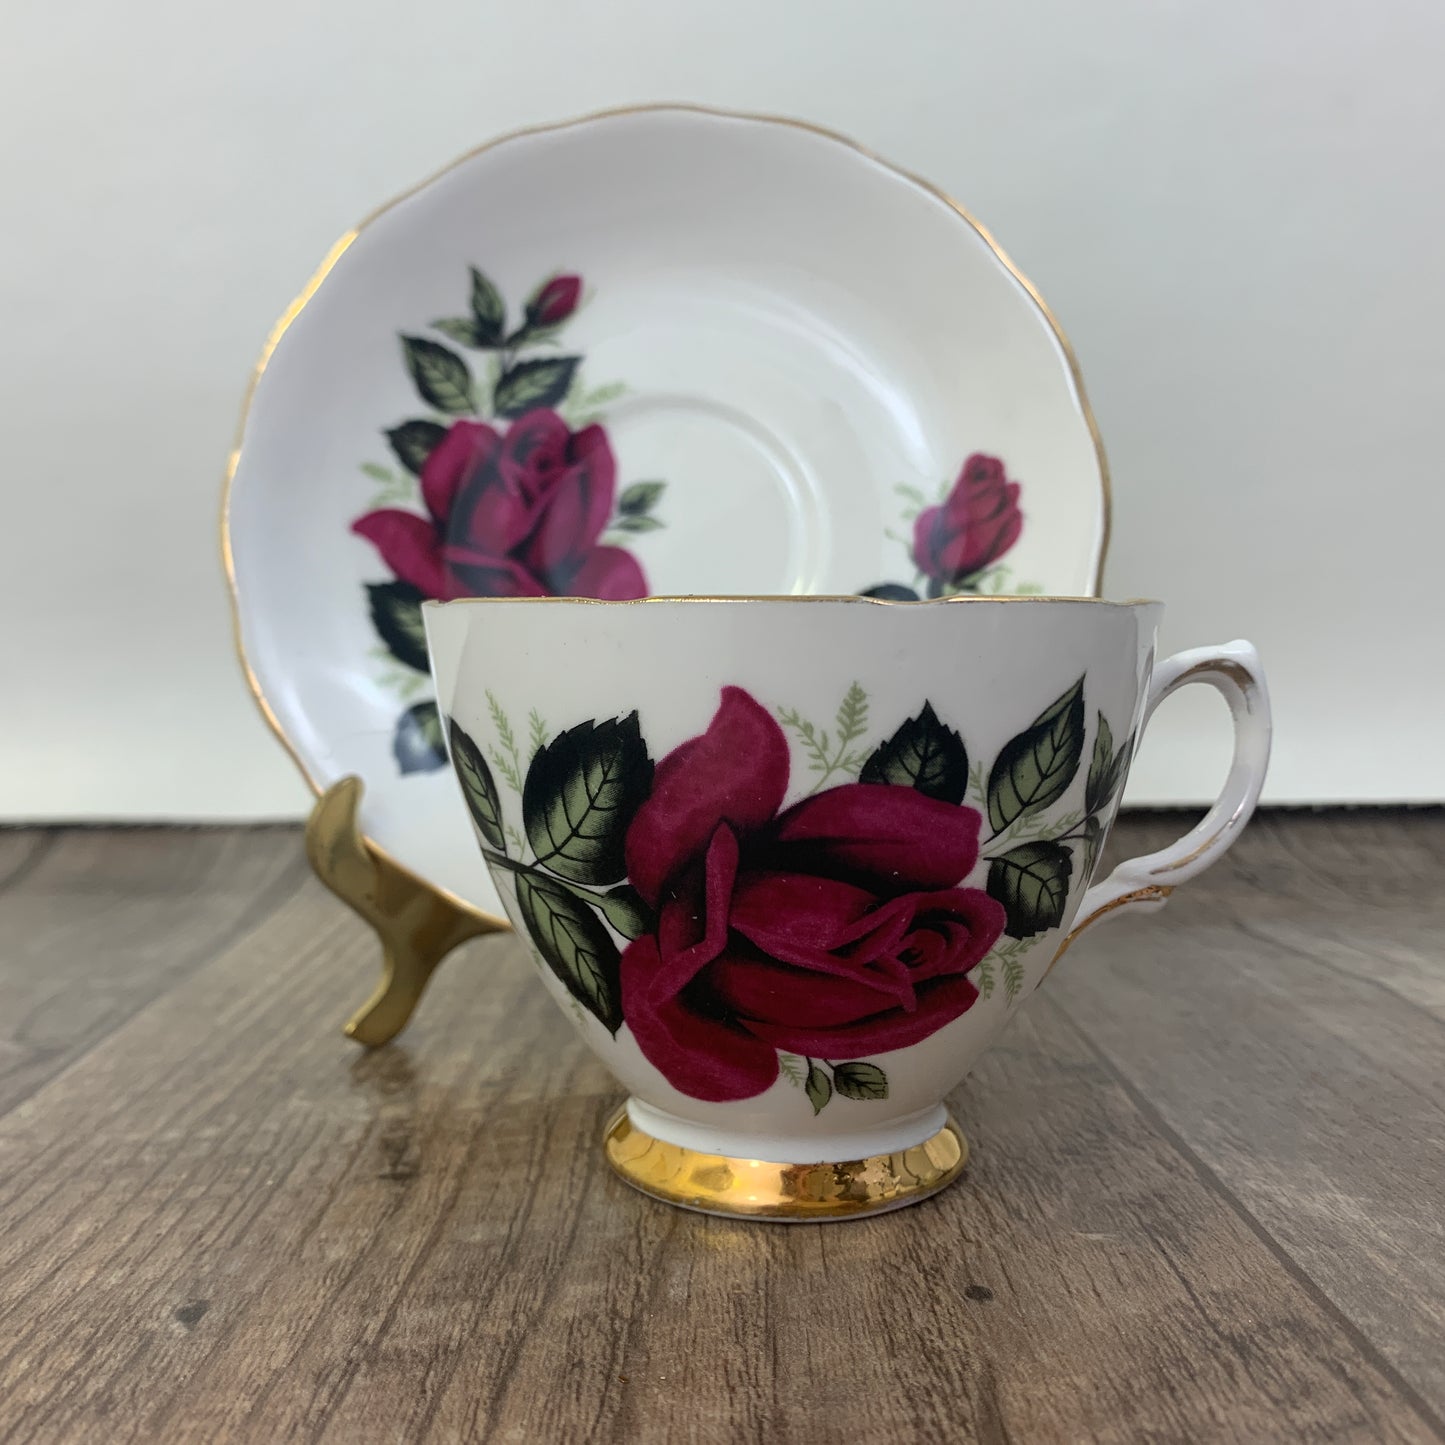 Vintage Teacup with Red Roses, Colclough English China Tea Cup